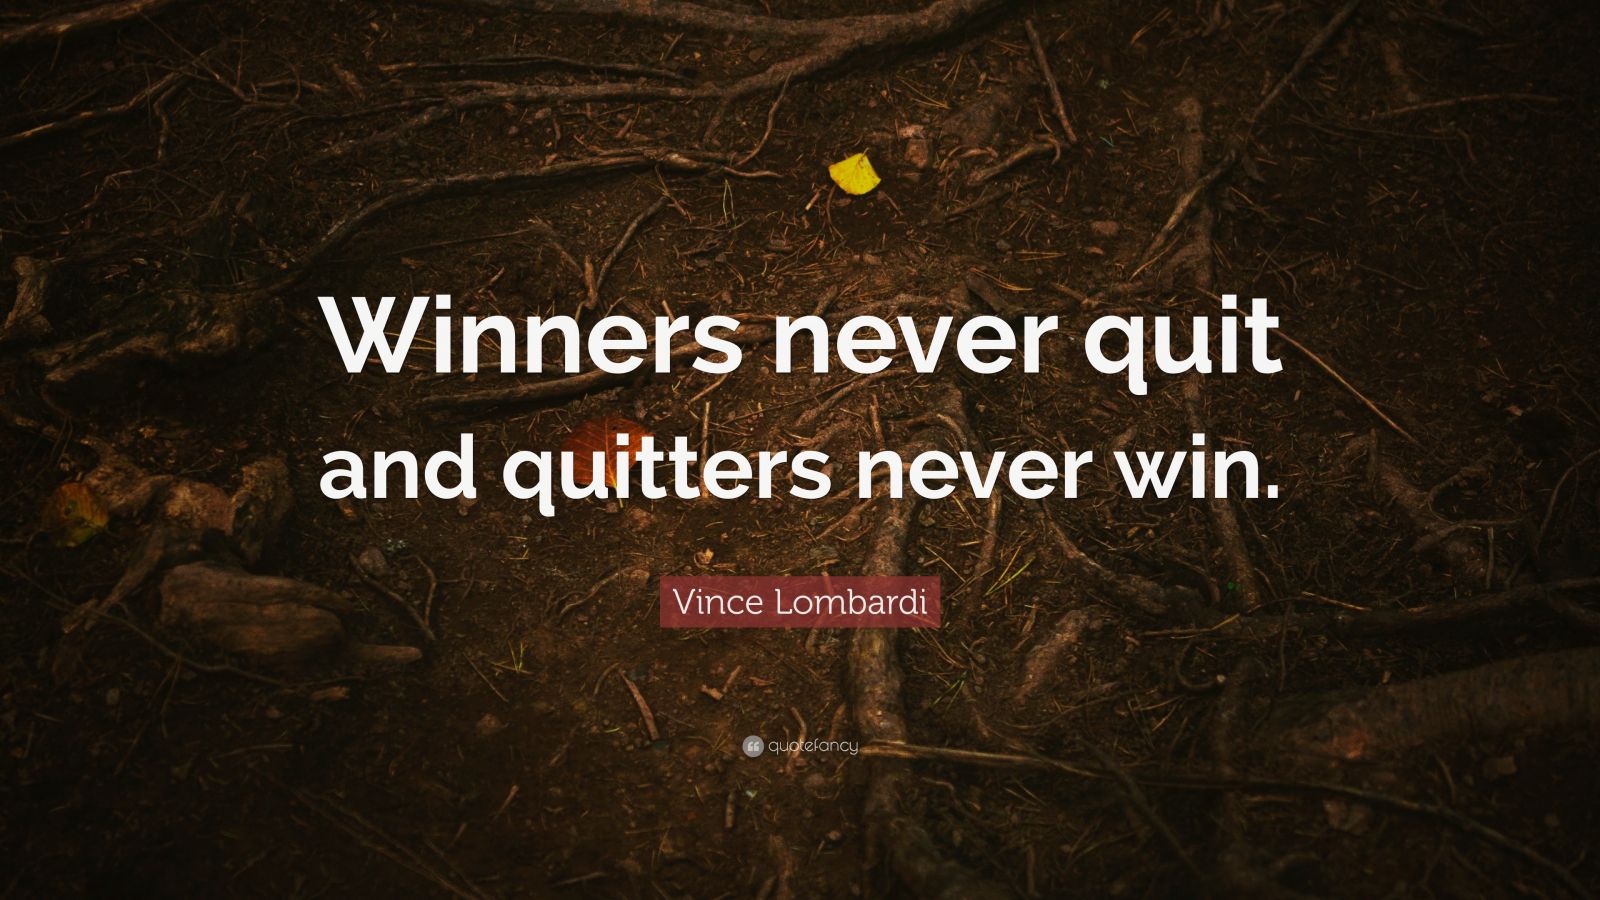 a quitter never wins and a winner never quits essay